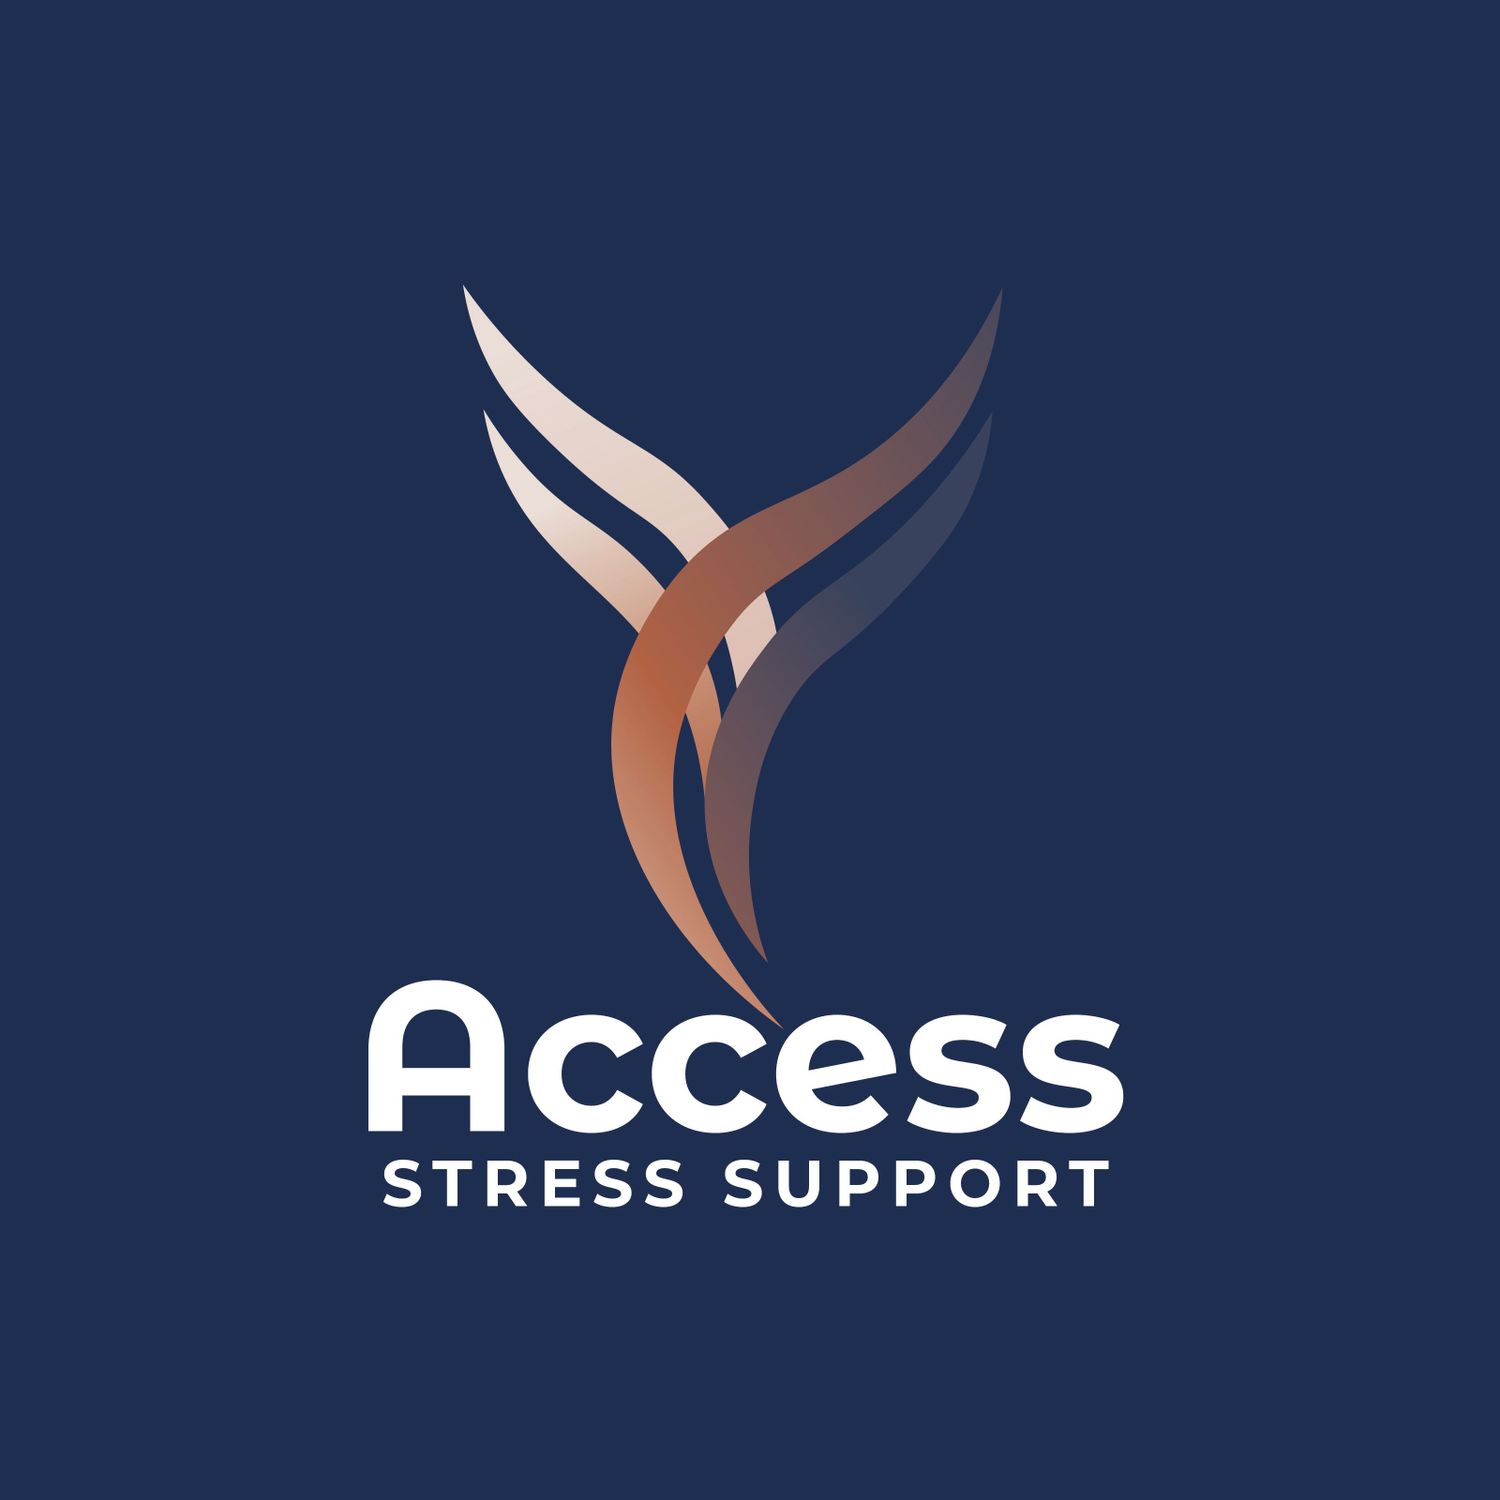 Gallery Photo of www.stress-support.com.au